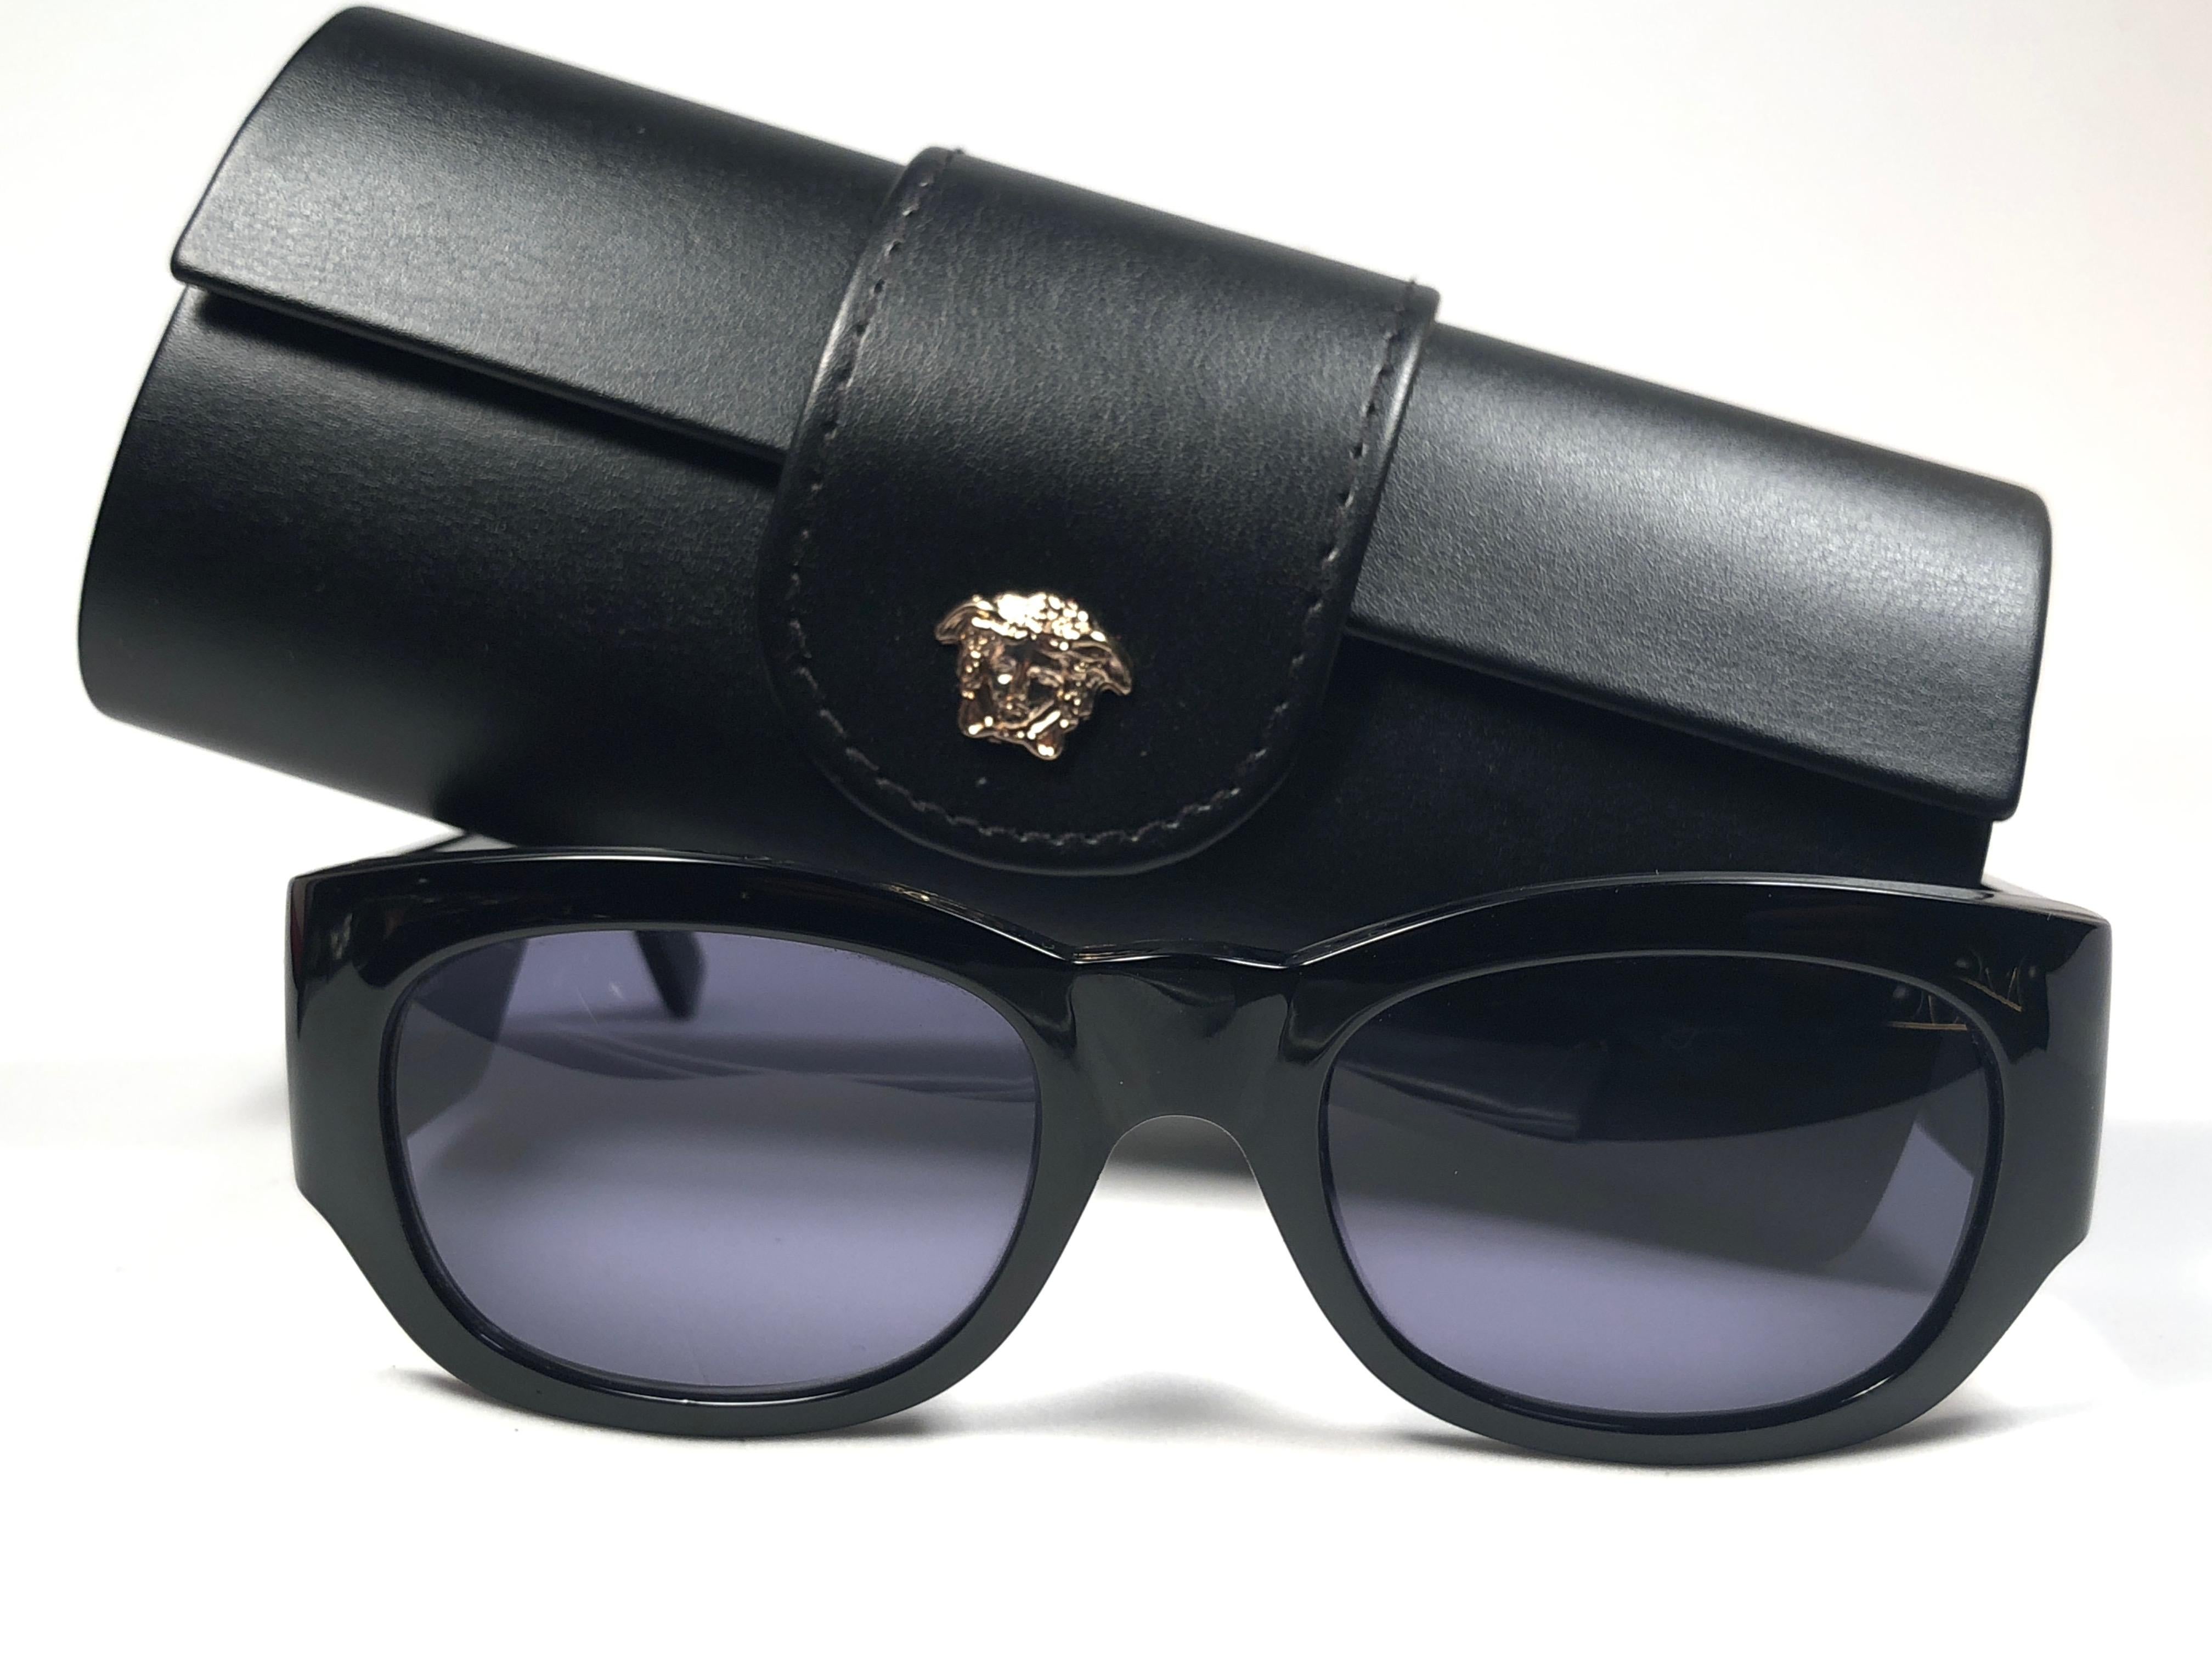  Vintage Gianni Versace medium BLACK with gold accents frame with medium grey lenses.
Comes with its original Gianni Versace case.
This pair could show minor sign of wear due to storage.

Made in italy.